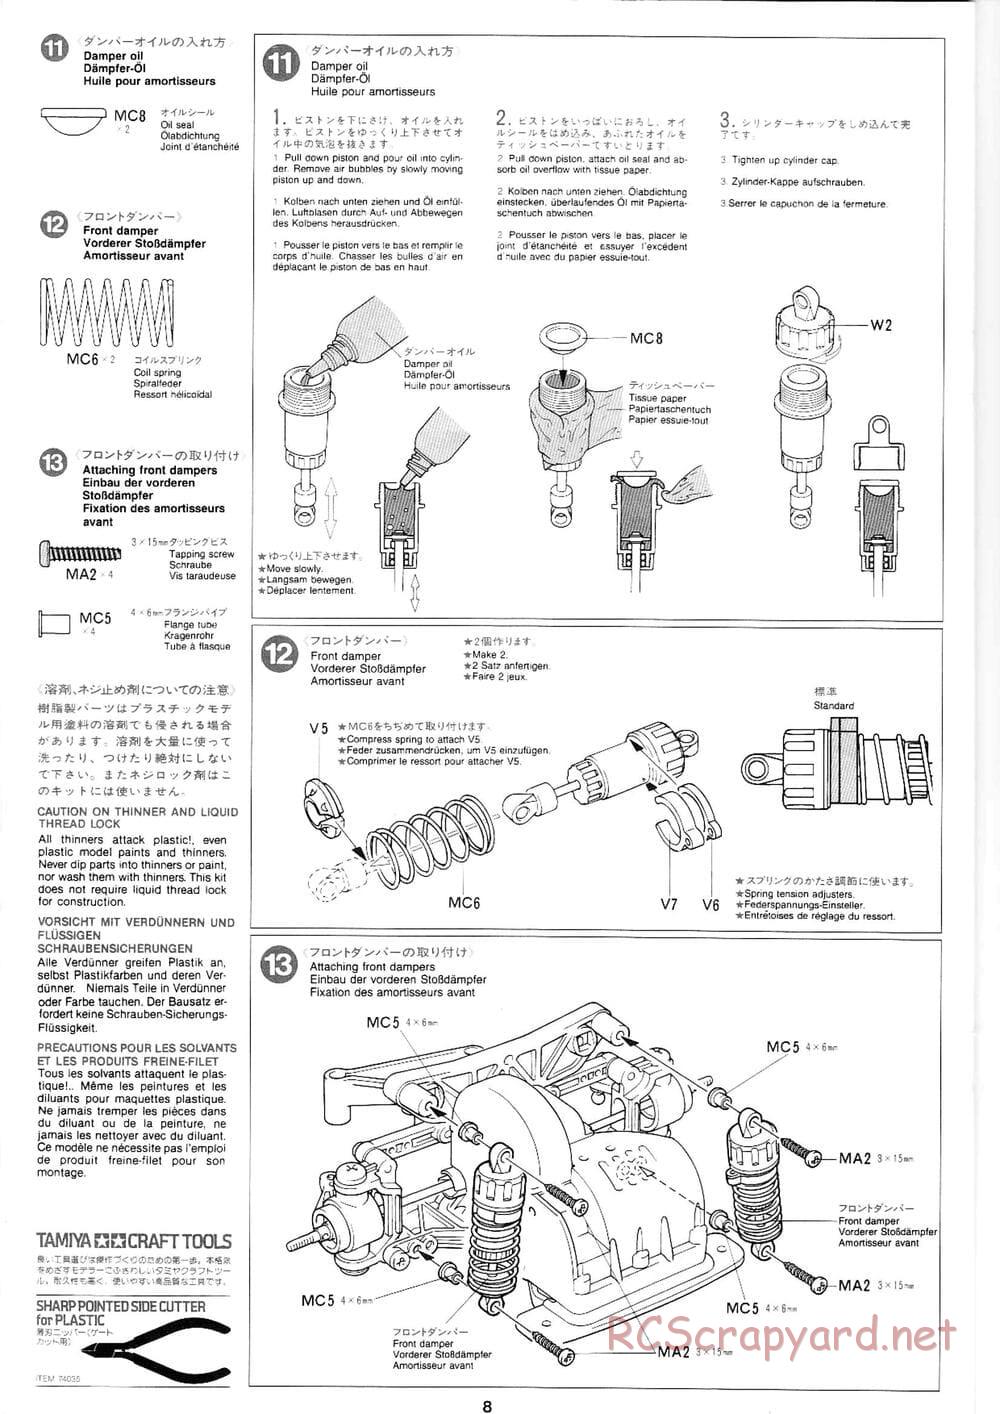 Tamiya - Volkswagen New Beetle - FF-01 Chassis - Manual - Page 6